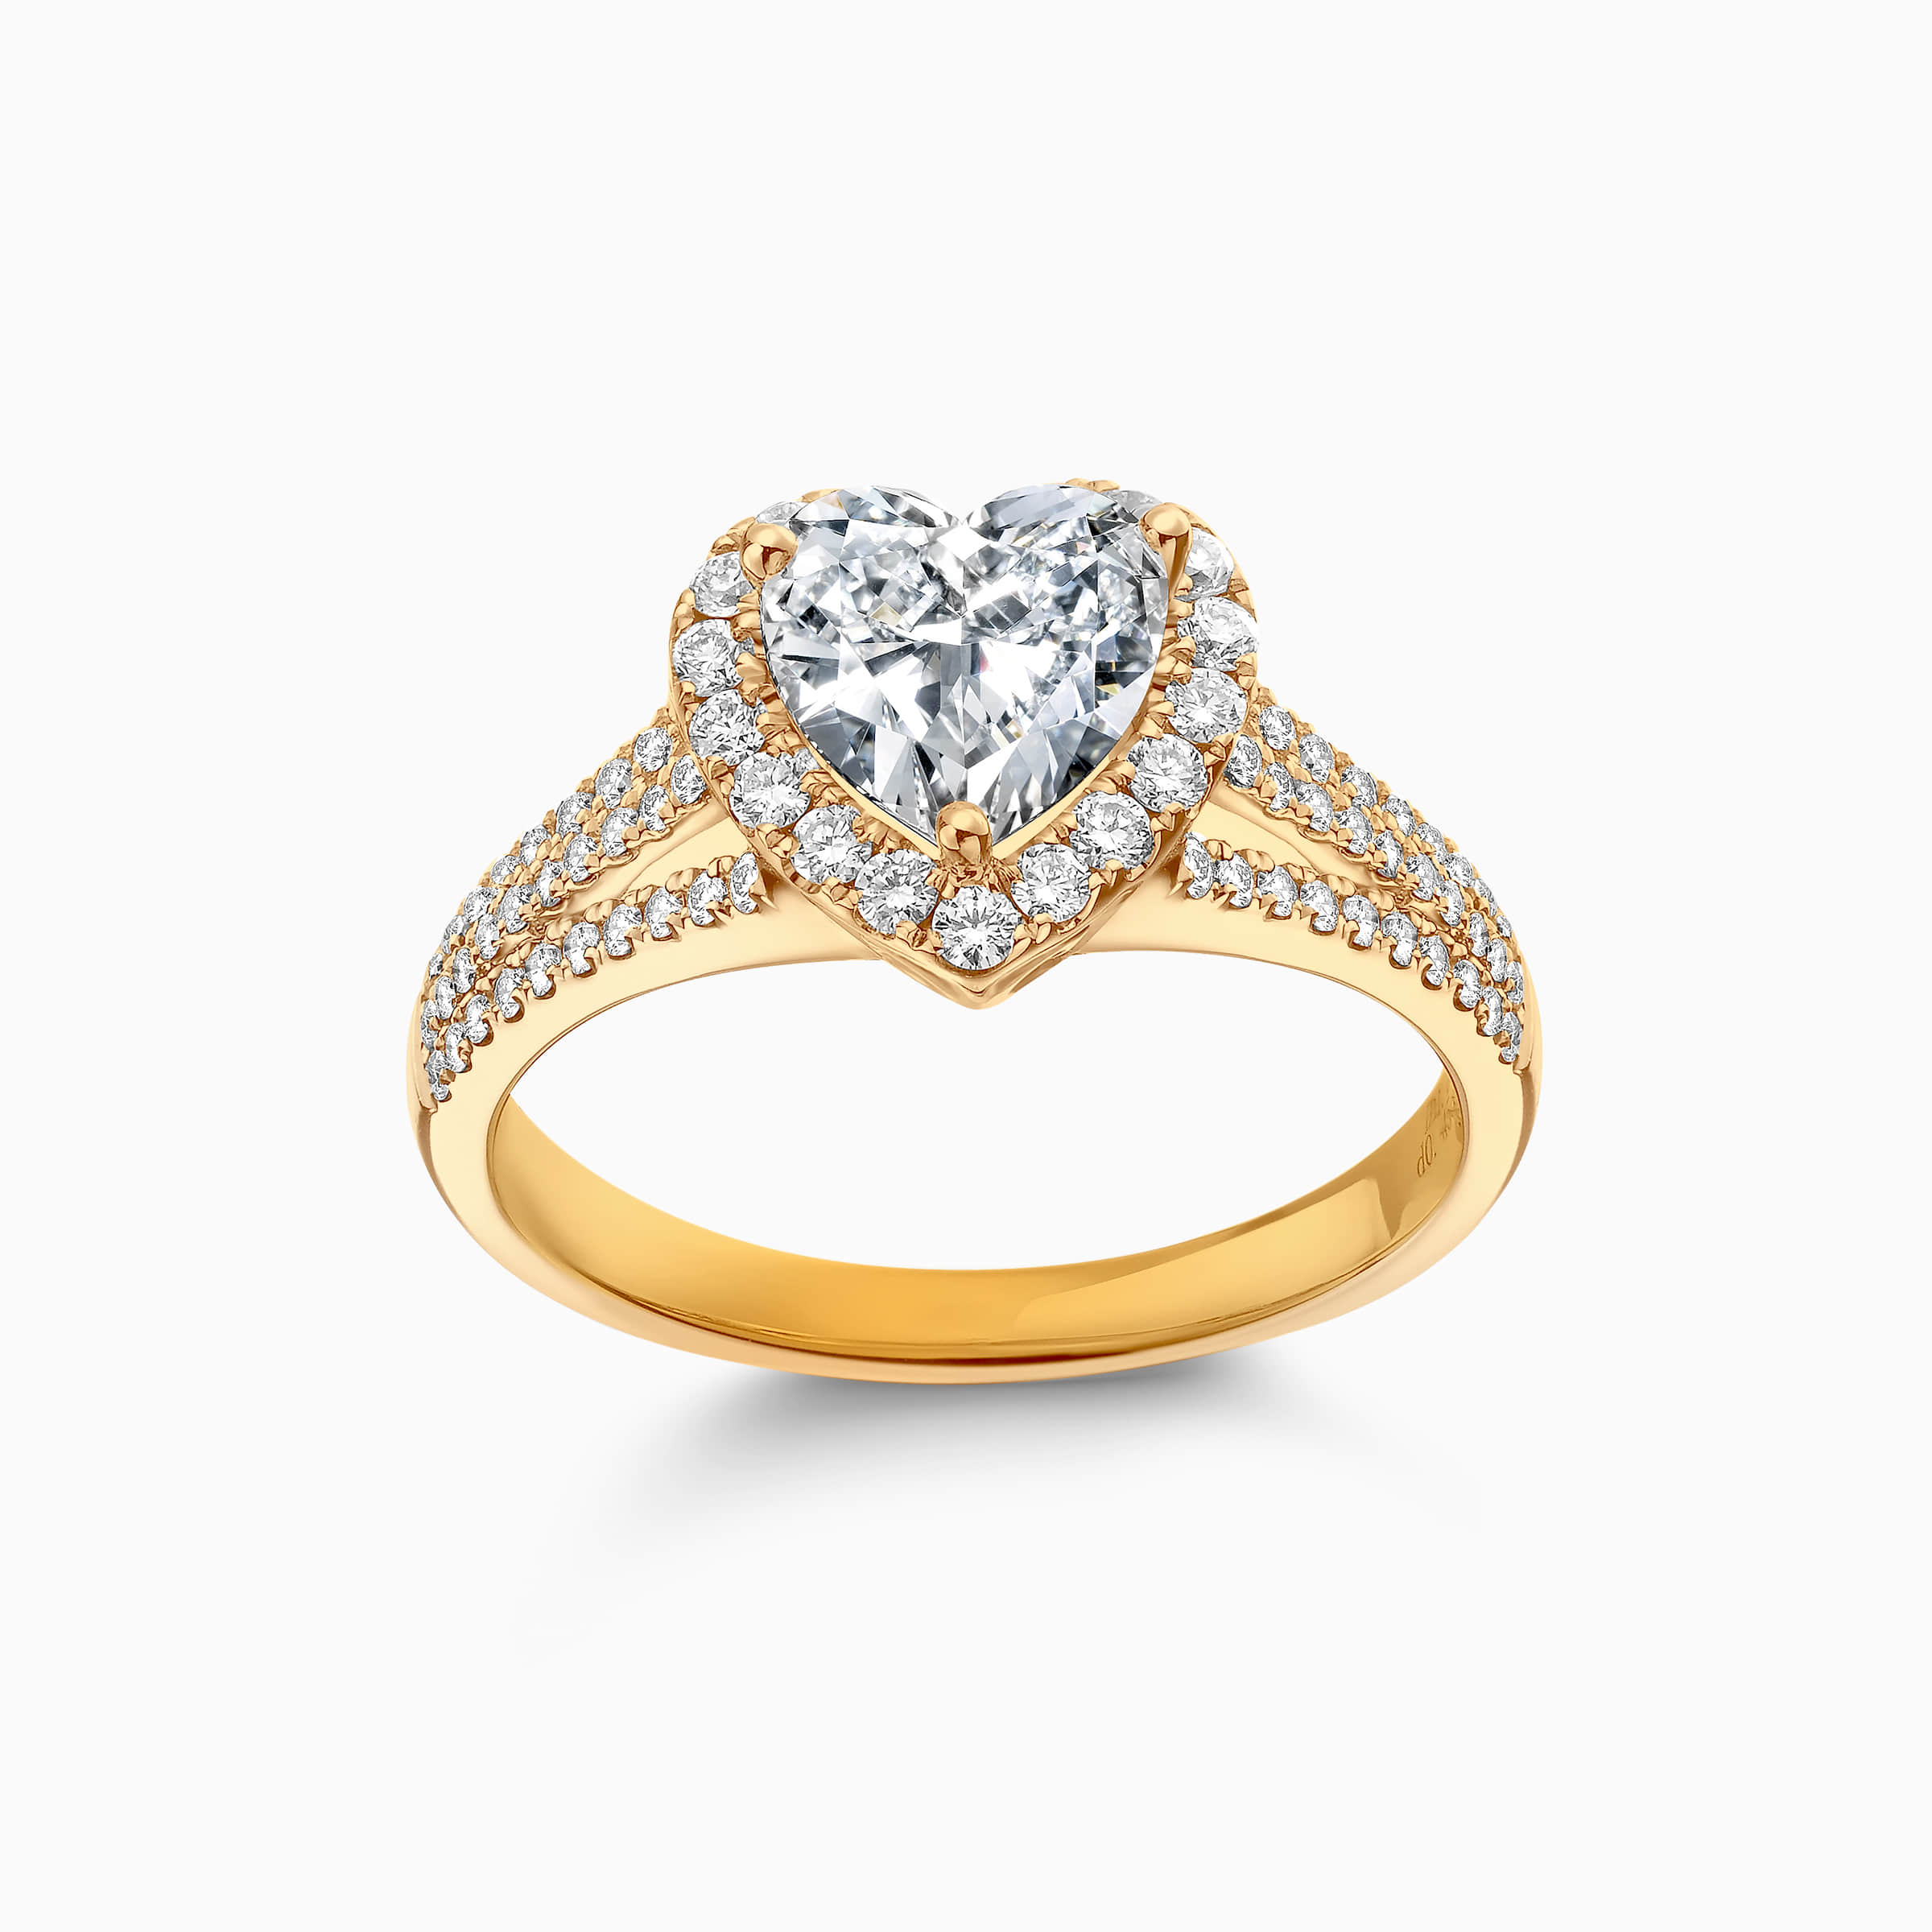 Darry Ring heart promise ring yellow gold